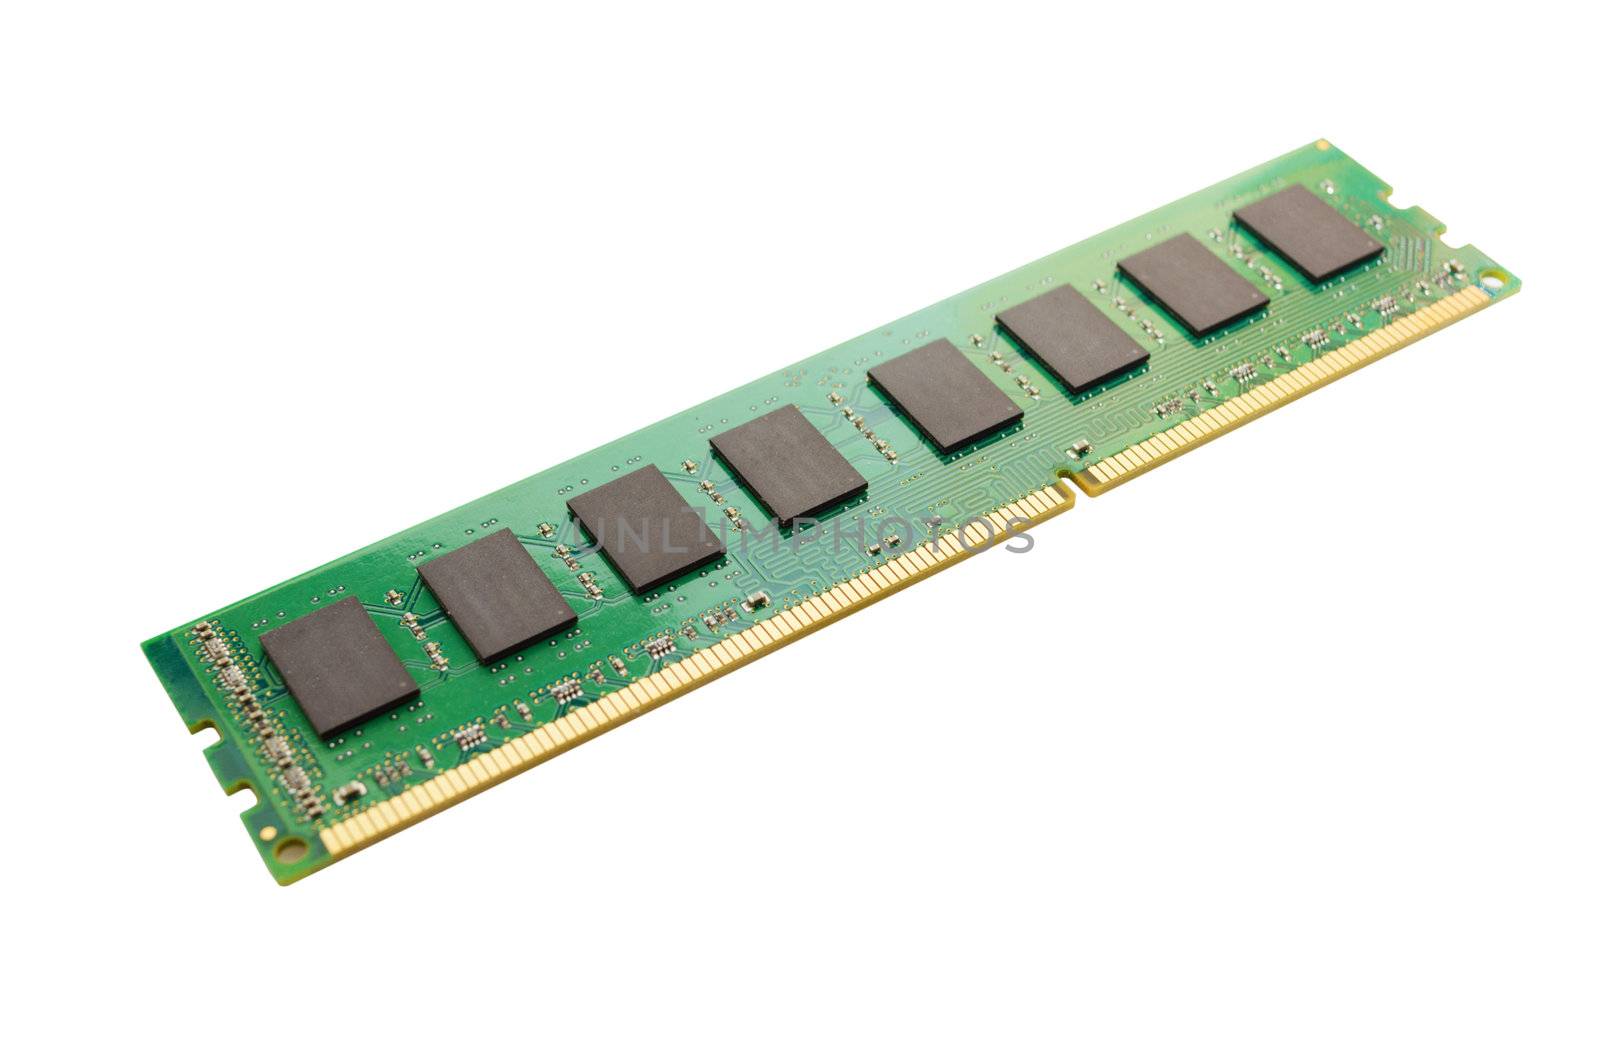 Memory module isolated on white by nprause